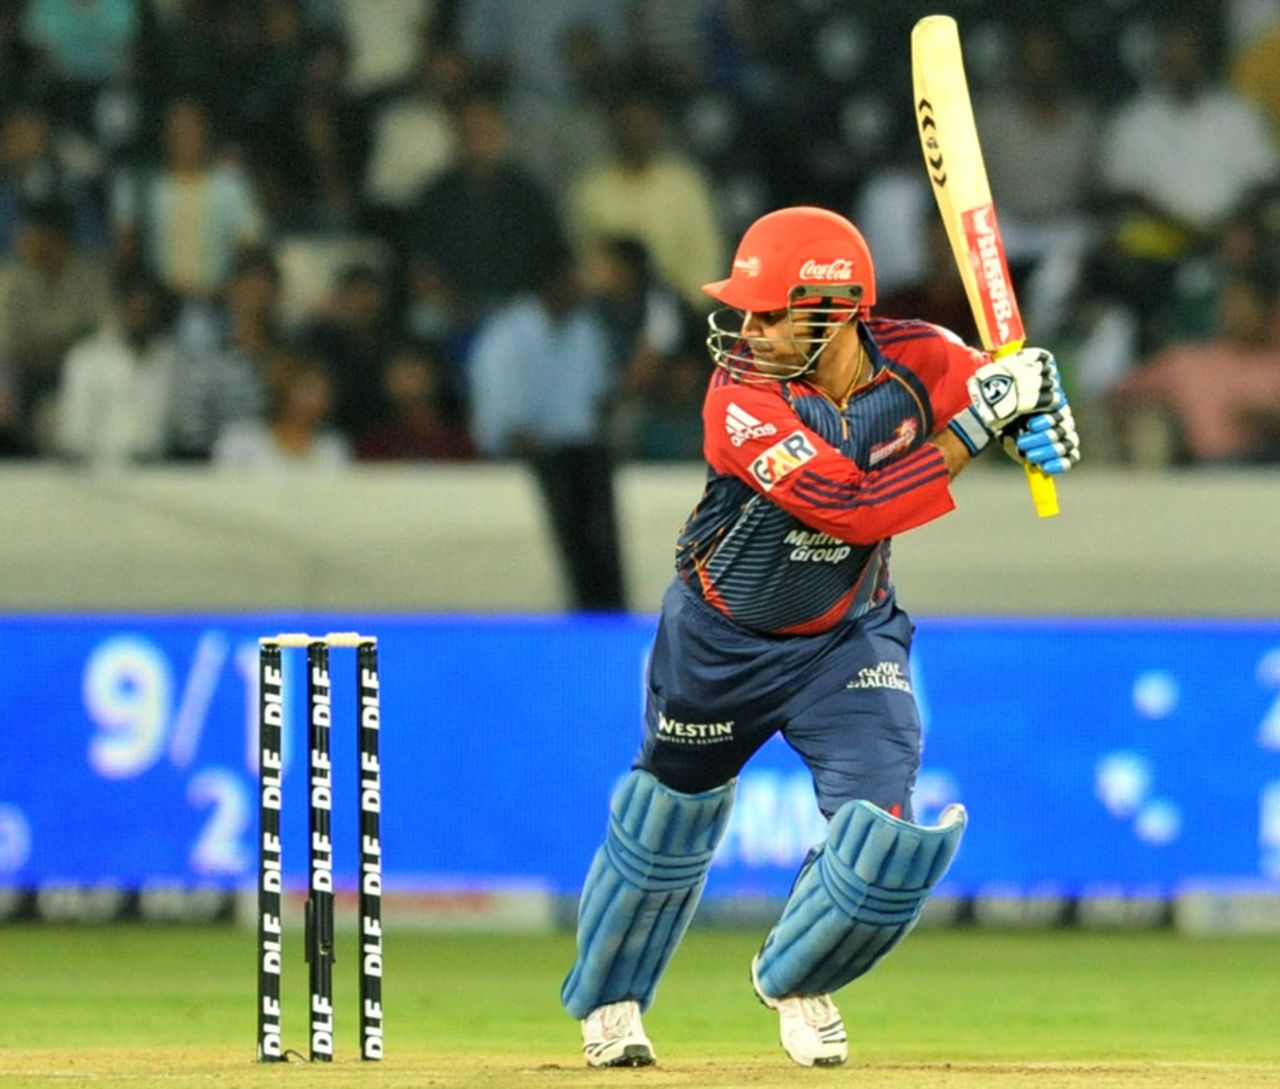 Virender Sehwag scores through the off side, Deccan Chargers v Delhi Daredevils, IPL 2011, Hyderabad, May 5, 2011